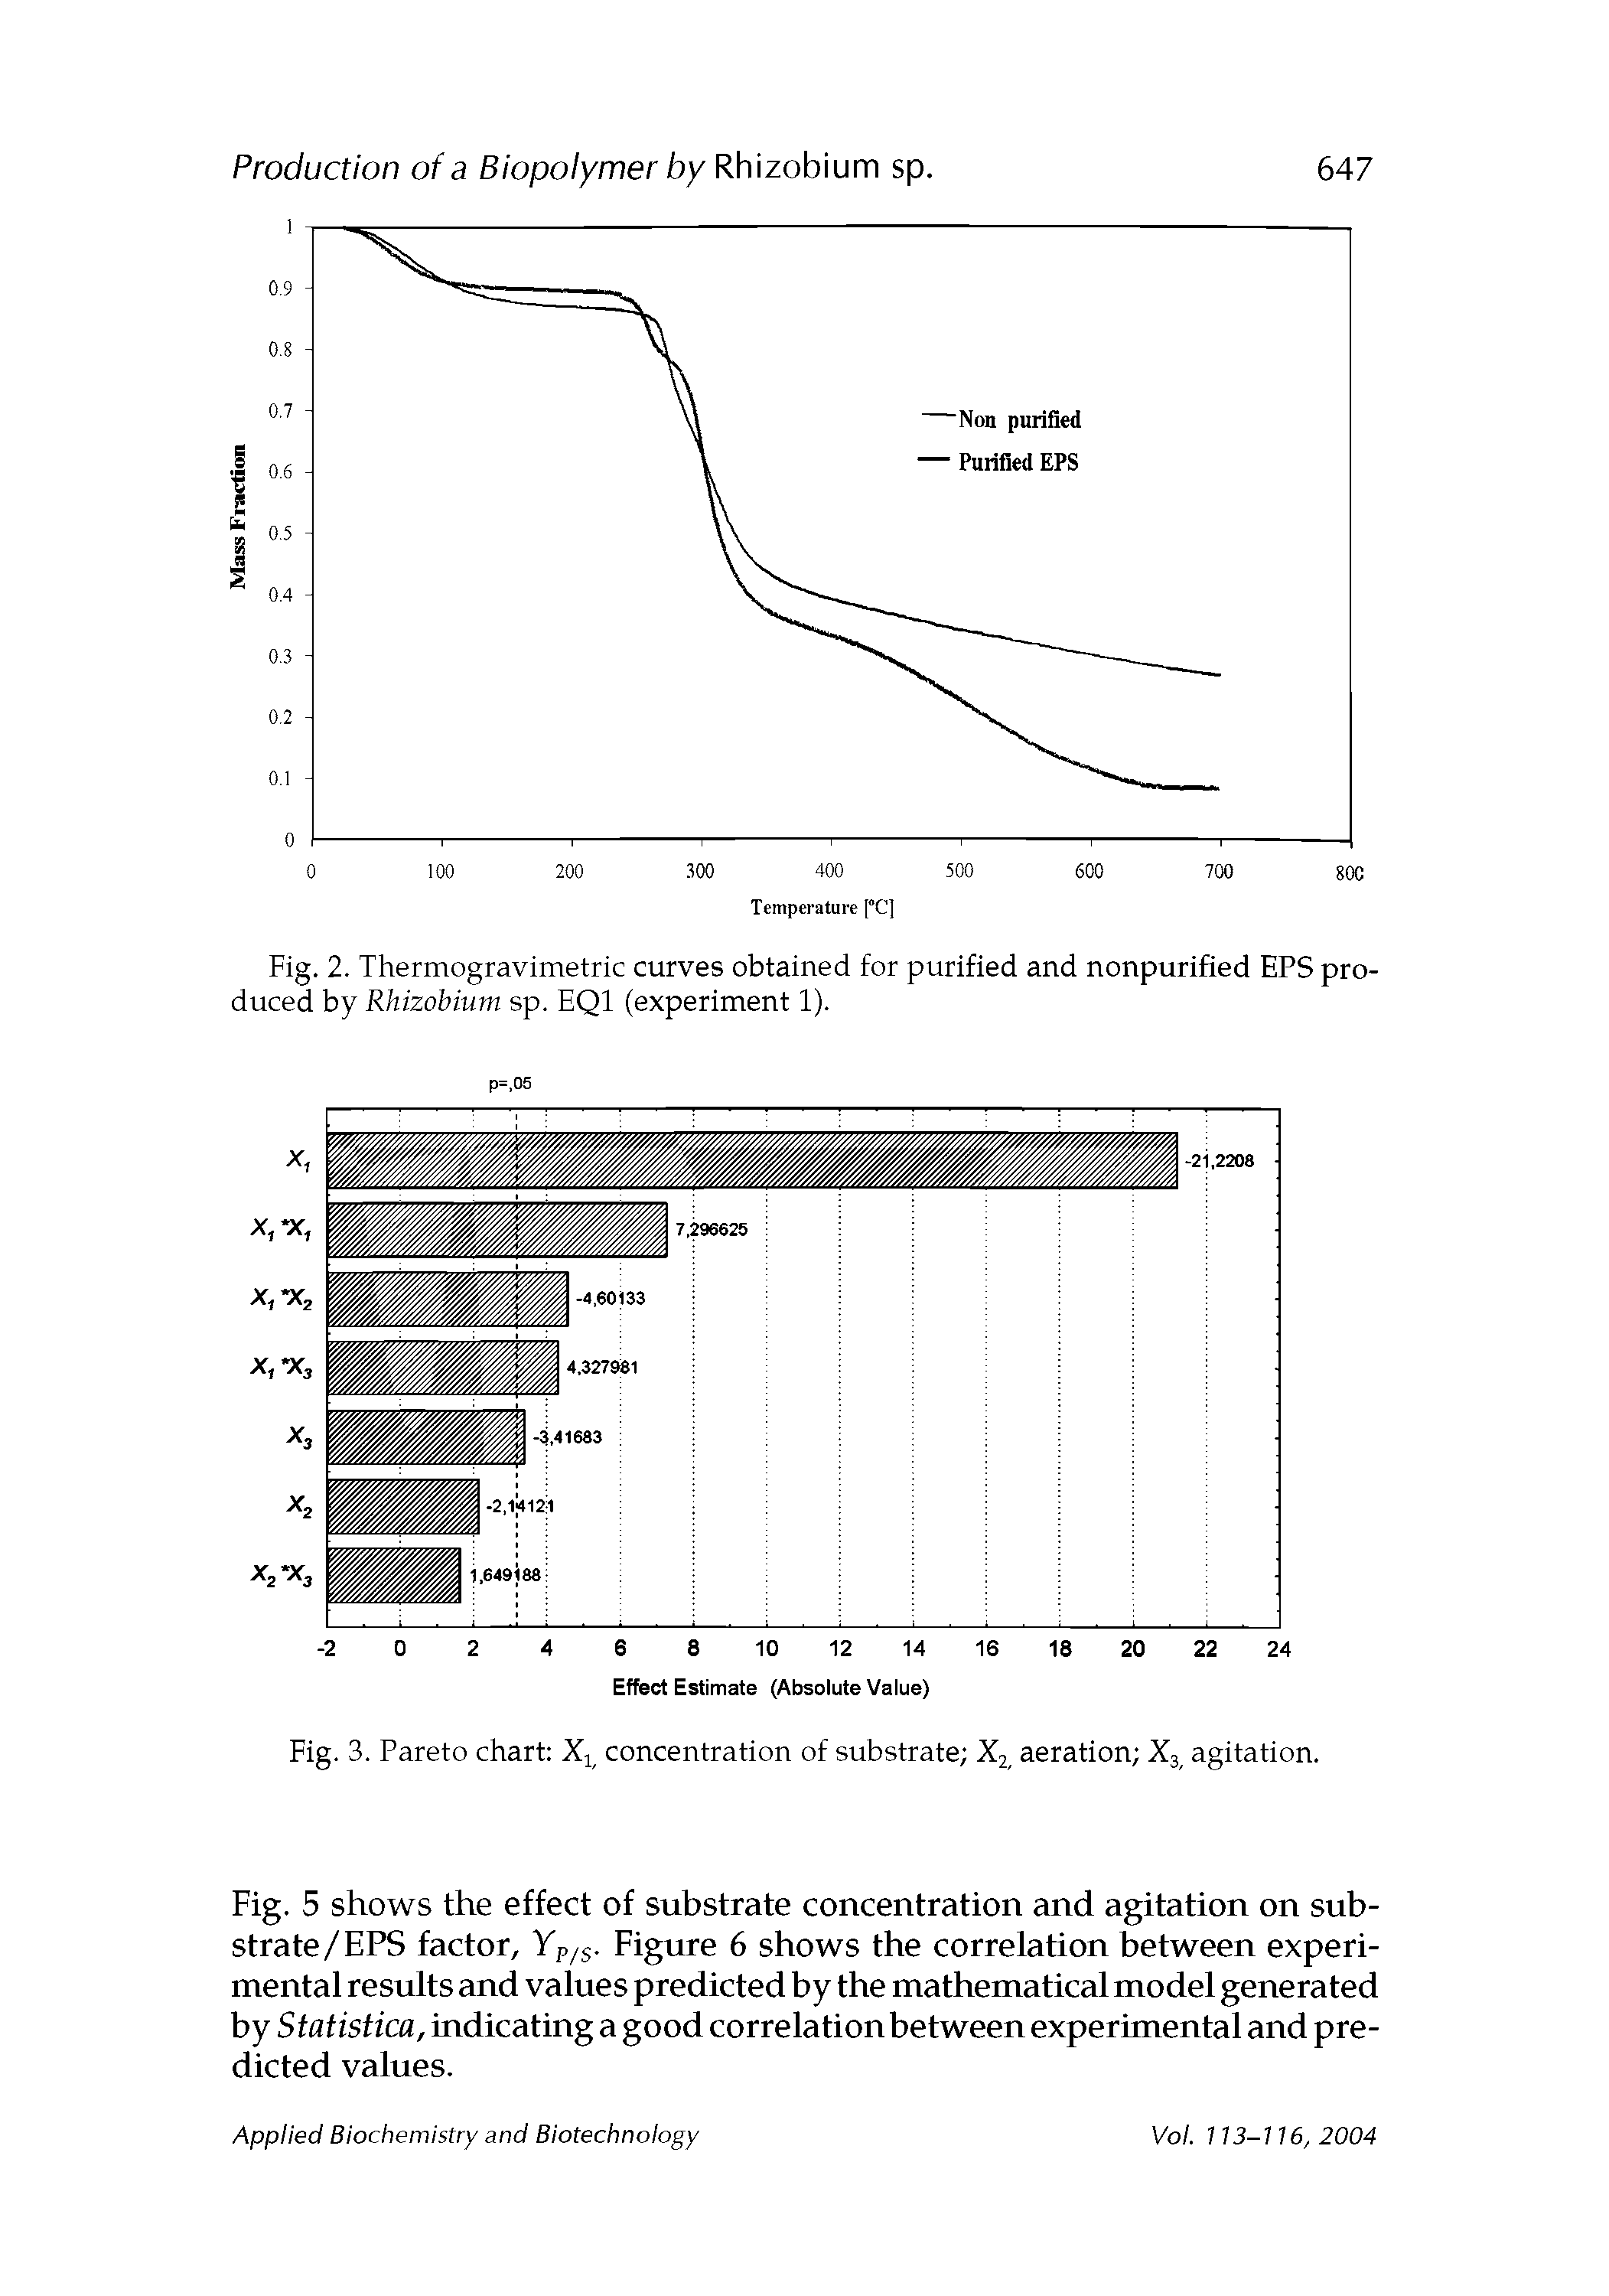 Fig. 2. Thermogravimetric curves obtained for purified and nonpurified EPS produced by Rhizobium sp. EQ1 (experiment 1).